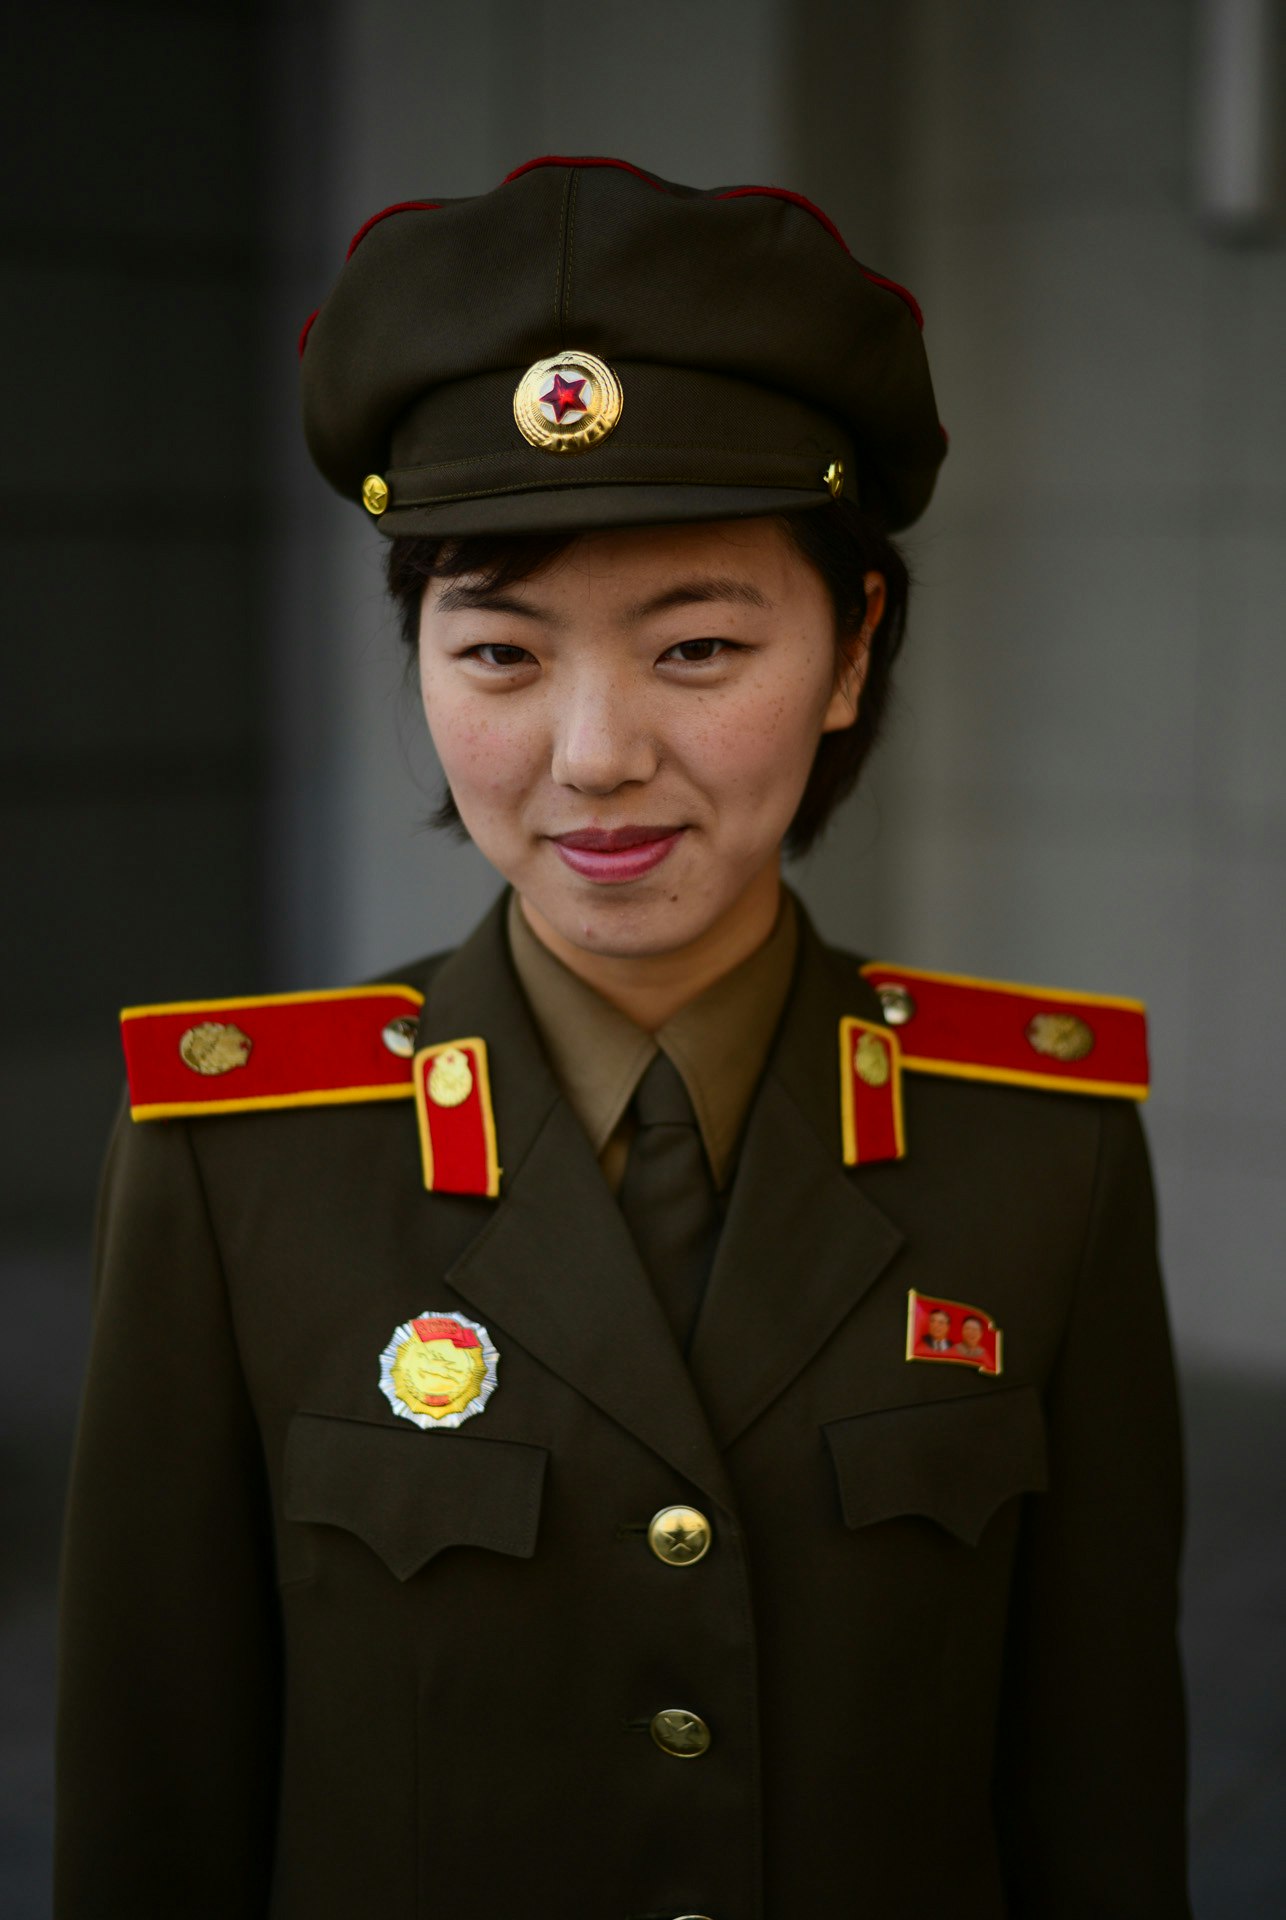 At the Victorious War Museum in Pyongyang a North Korean officer poses for the camera.